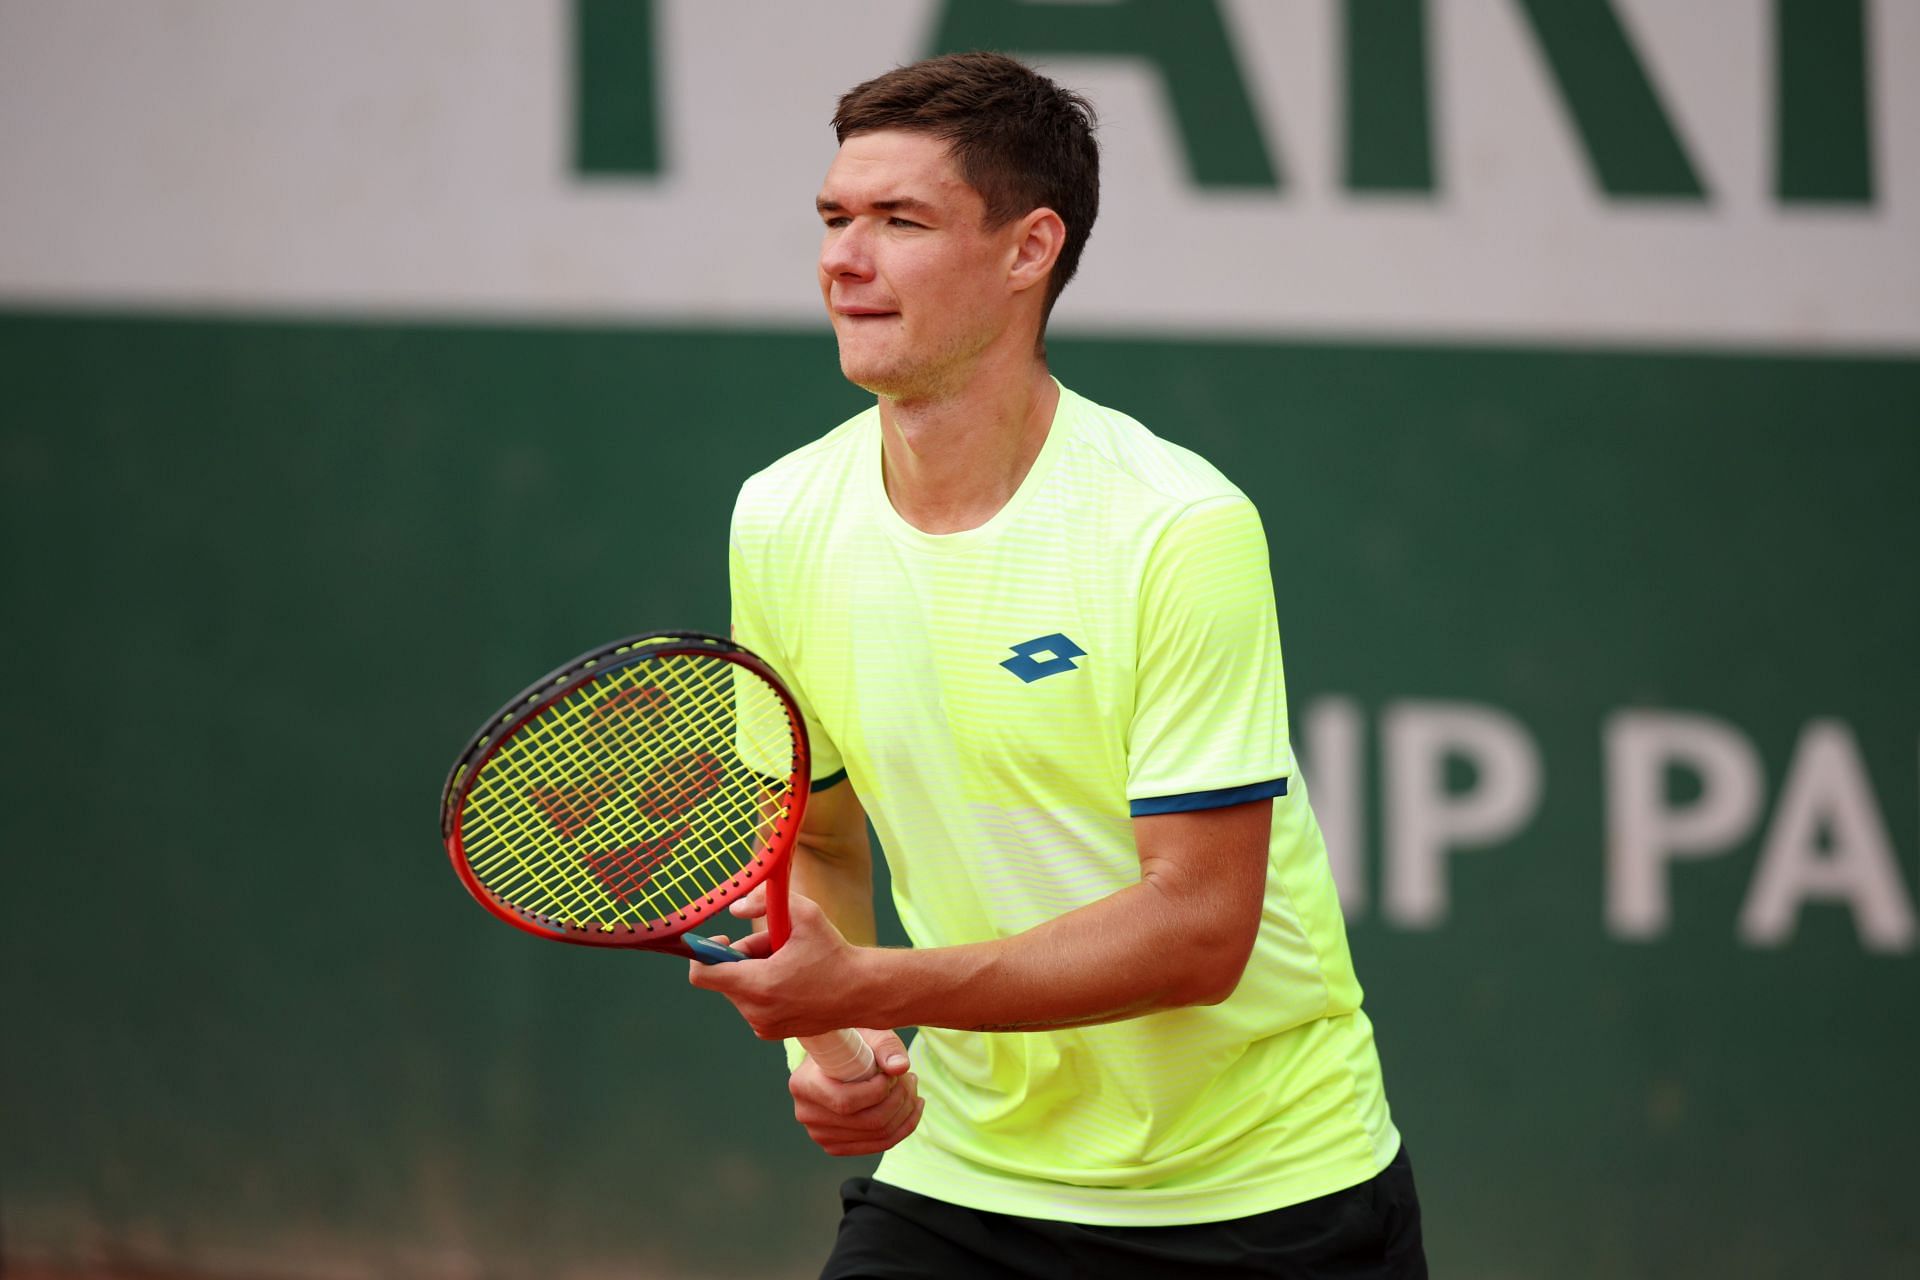 Kamil Majchrzak at the 2022 French Open.